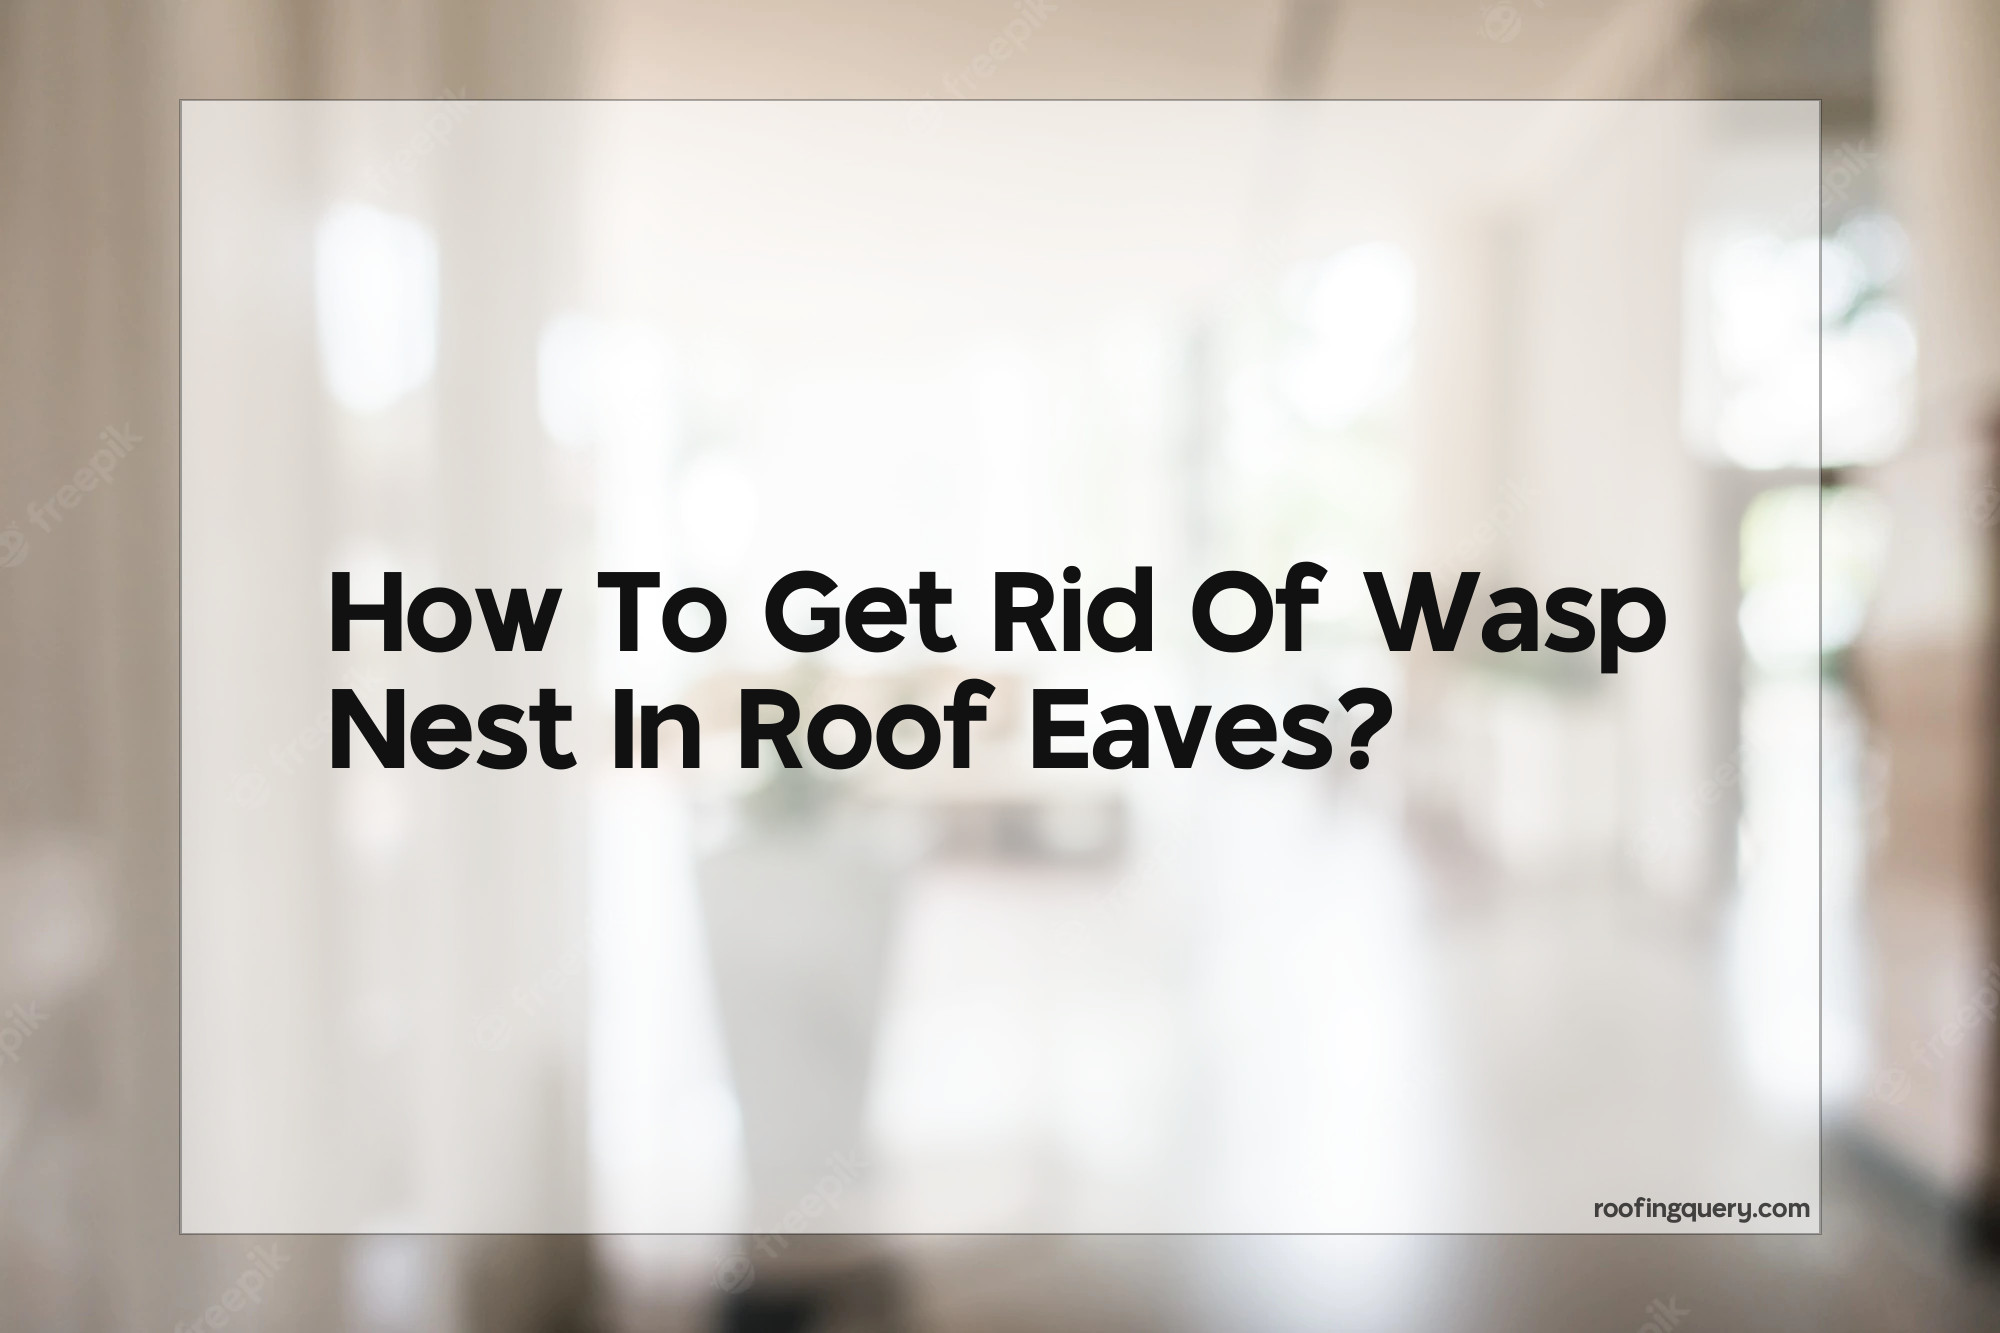 How To Get Rid Of Wasp Nest In Roof Eaves